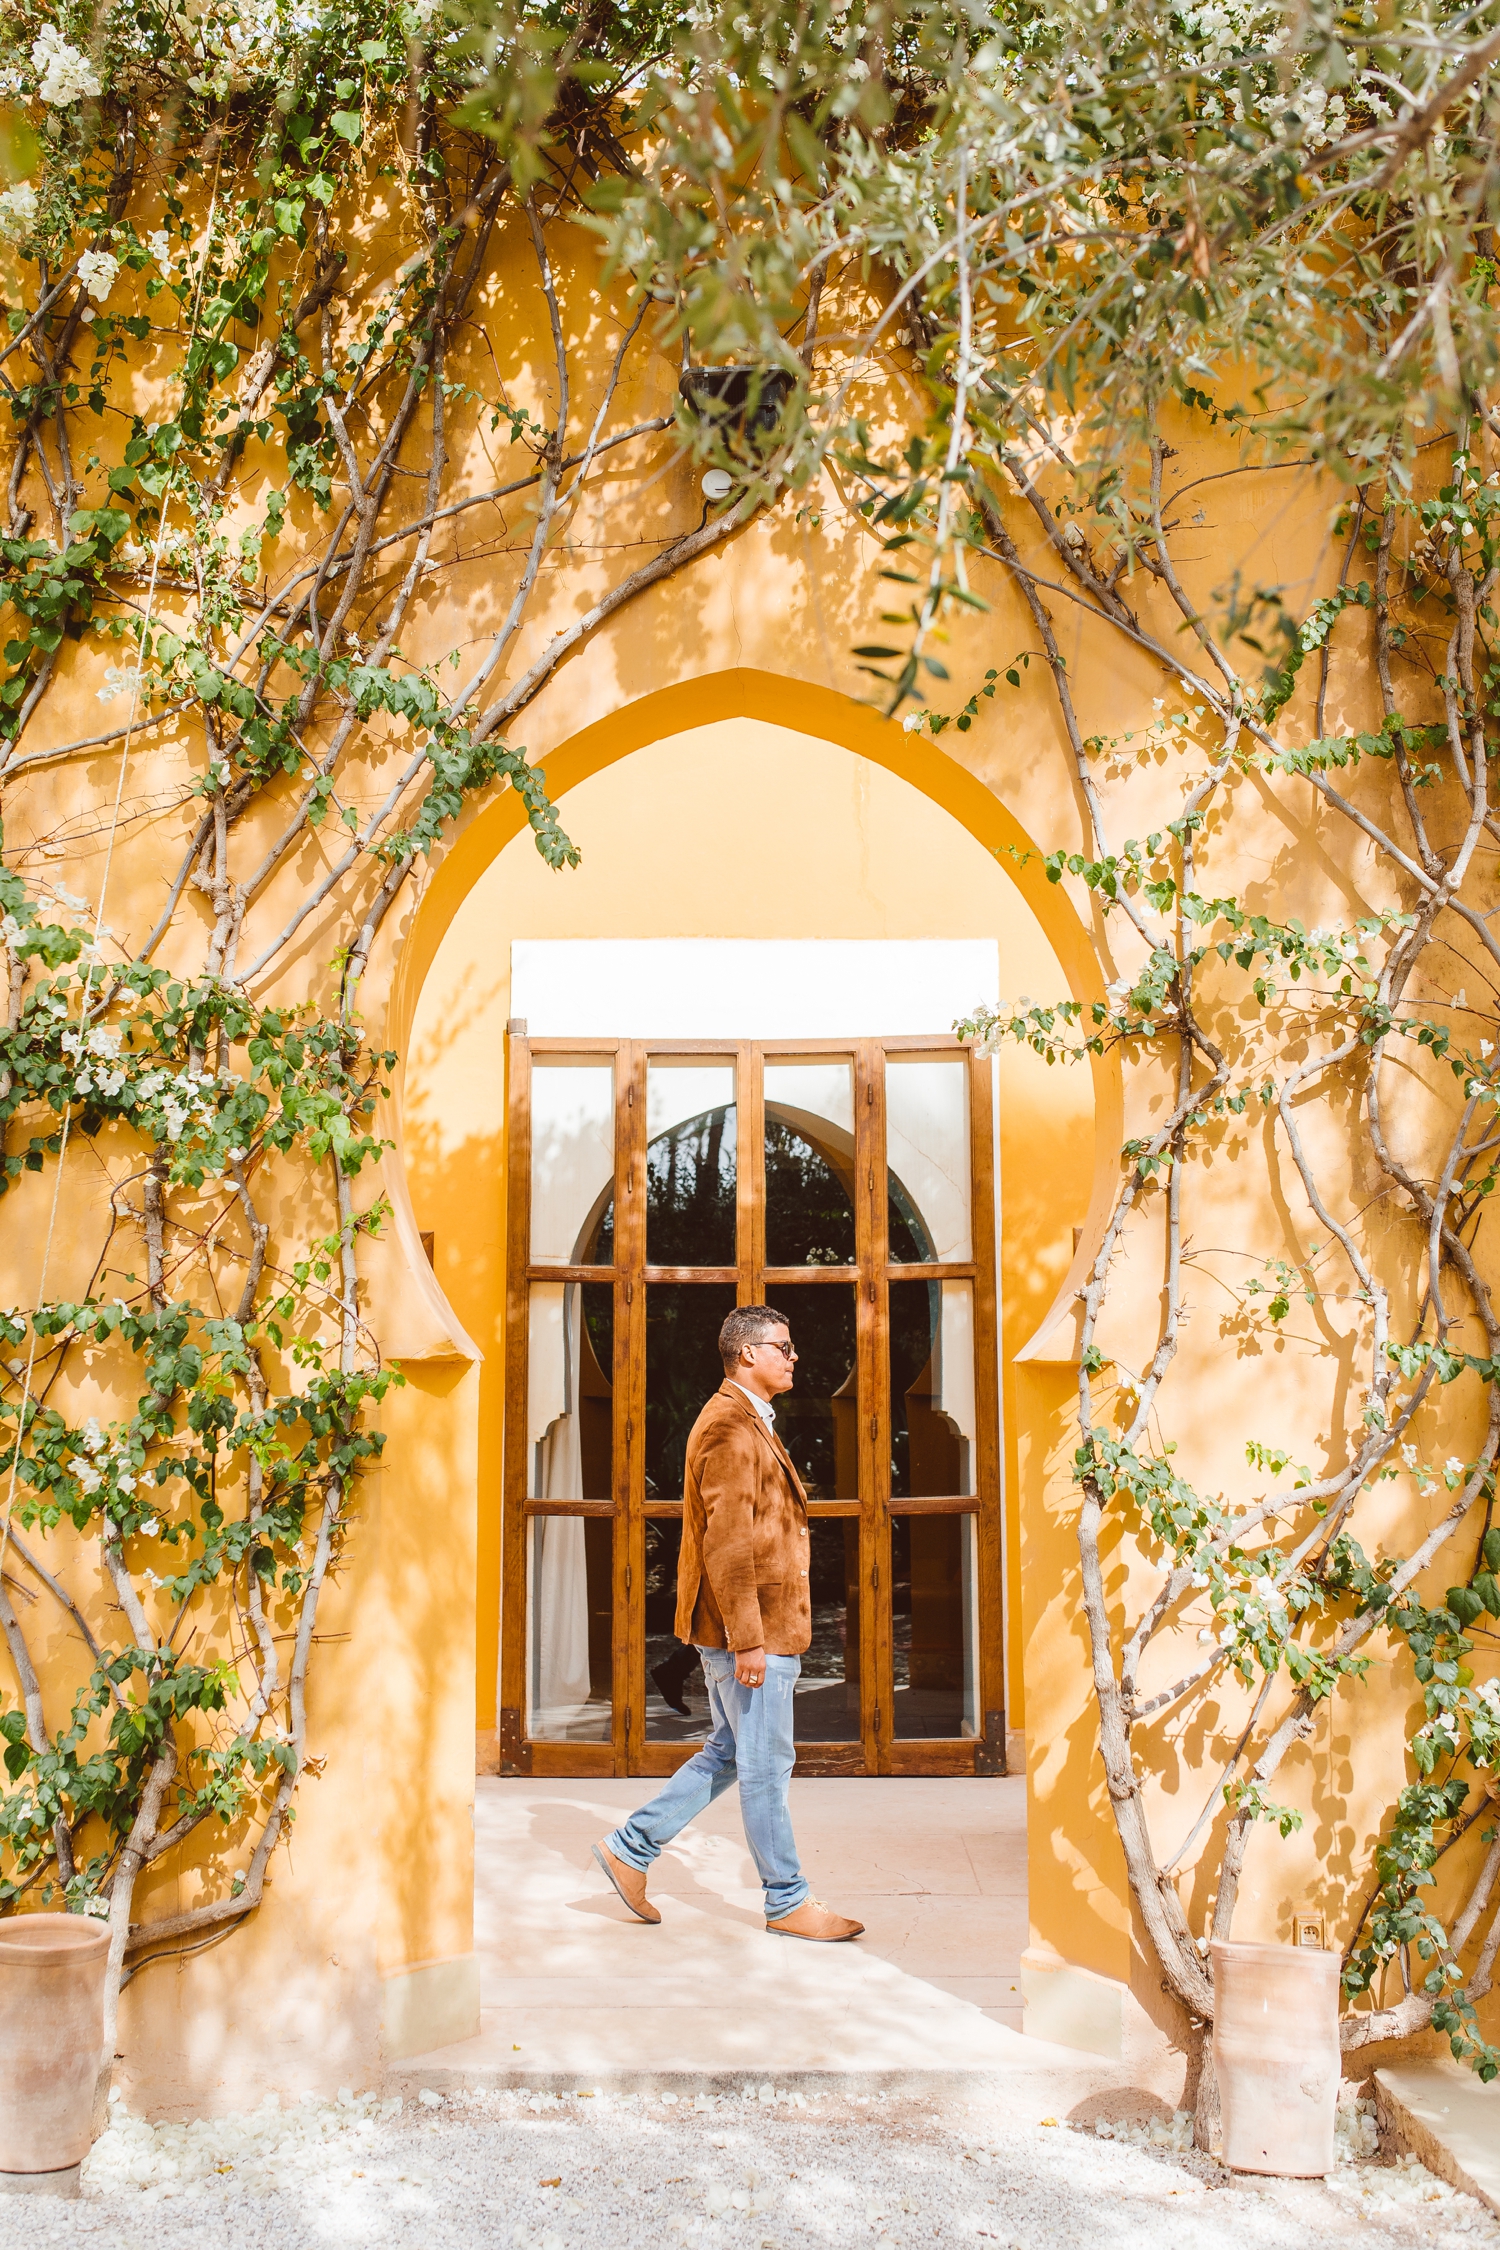 Man walking by arched door covered in ivy in Marrakesh, Morocco | Brooke Michelle Photography